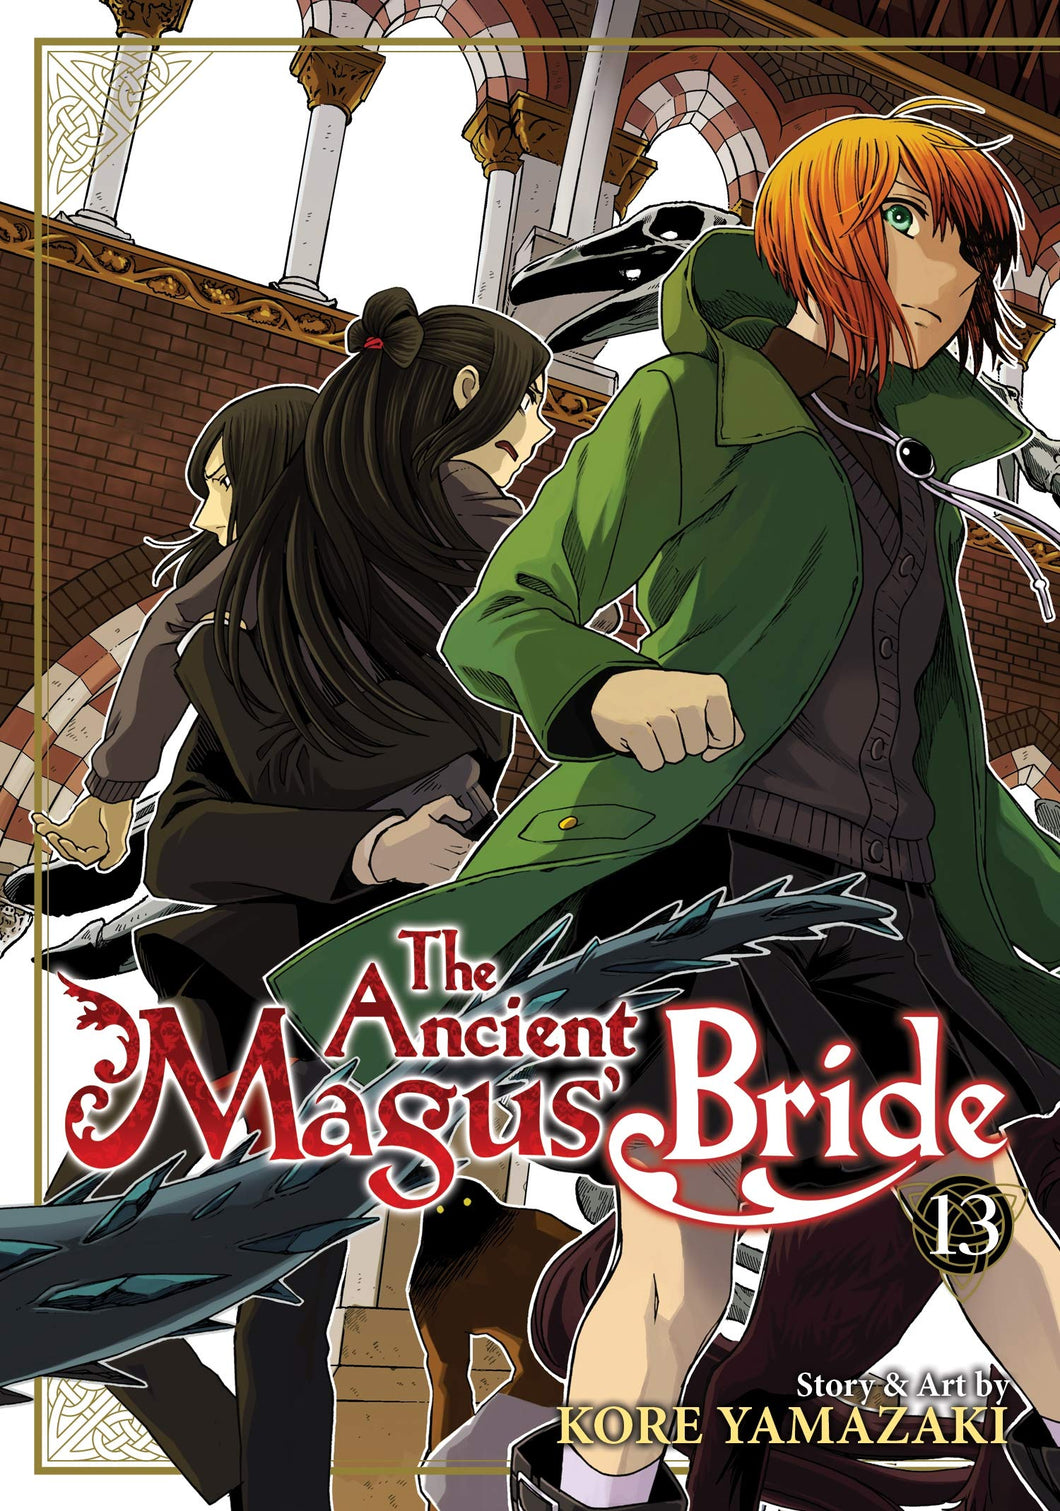 The Ancient Magus Bride Volume 13